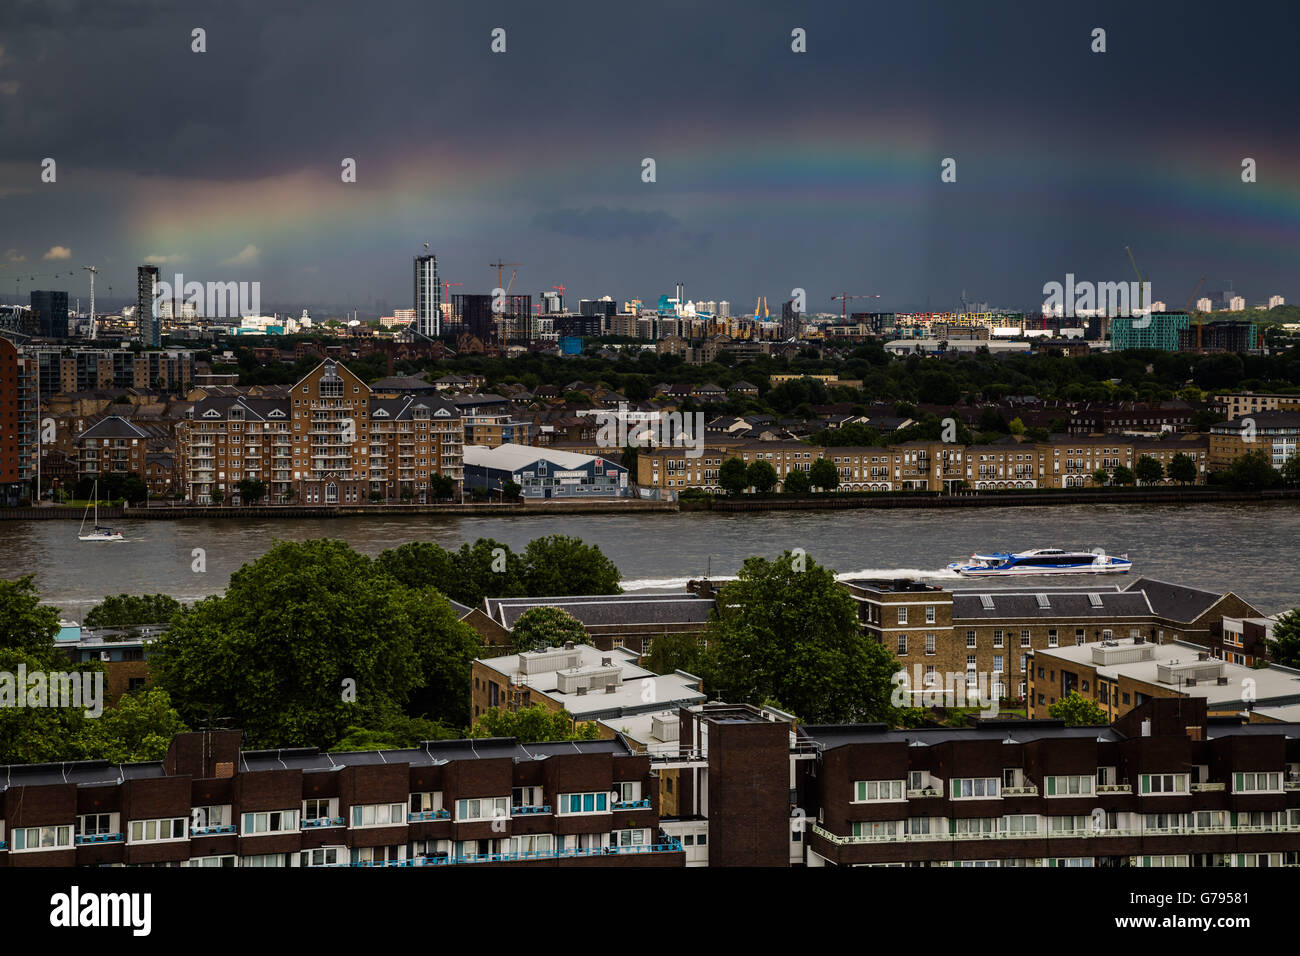 London, UK. 25th June, 2016. UK Weather: Colourful rainbow breaks after a brief rainstorm over south east London and River Thames Credit:  Guy Corbishley/Alamy Live News Stock Photo